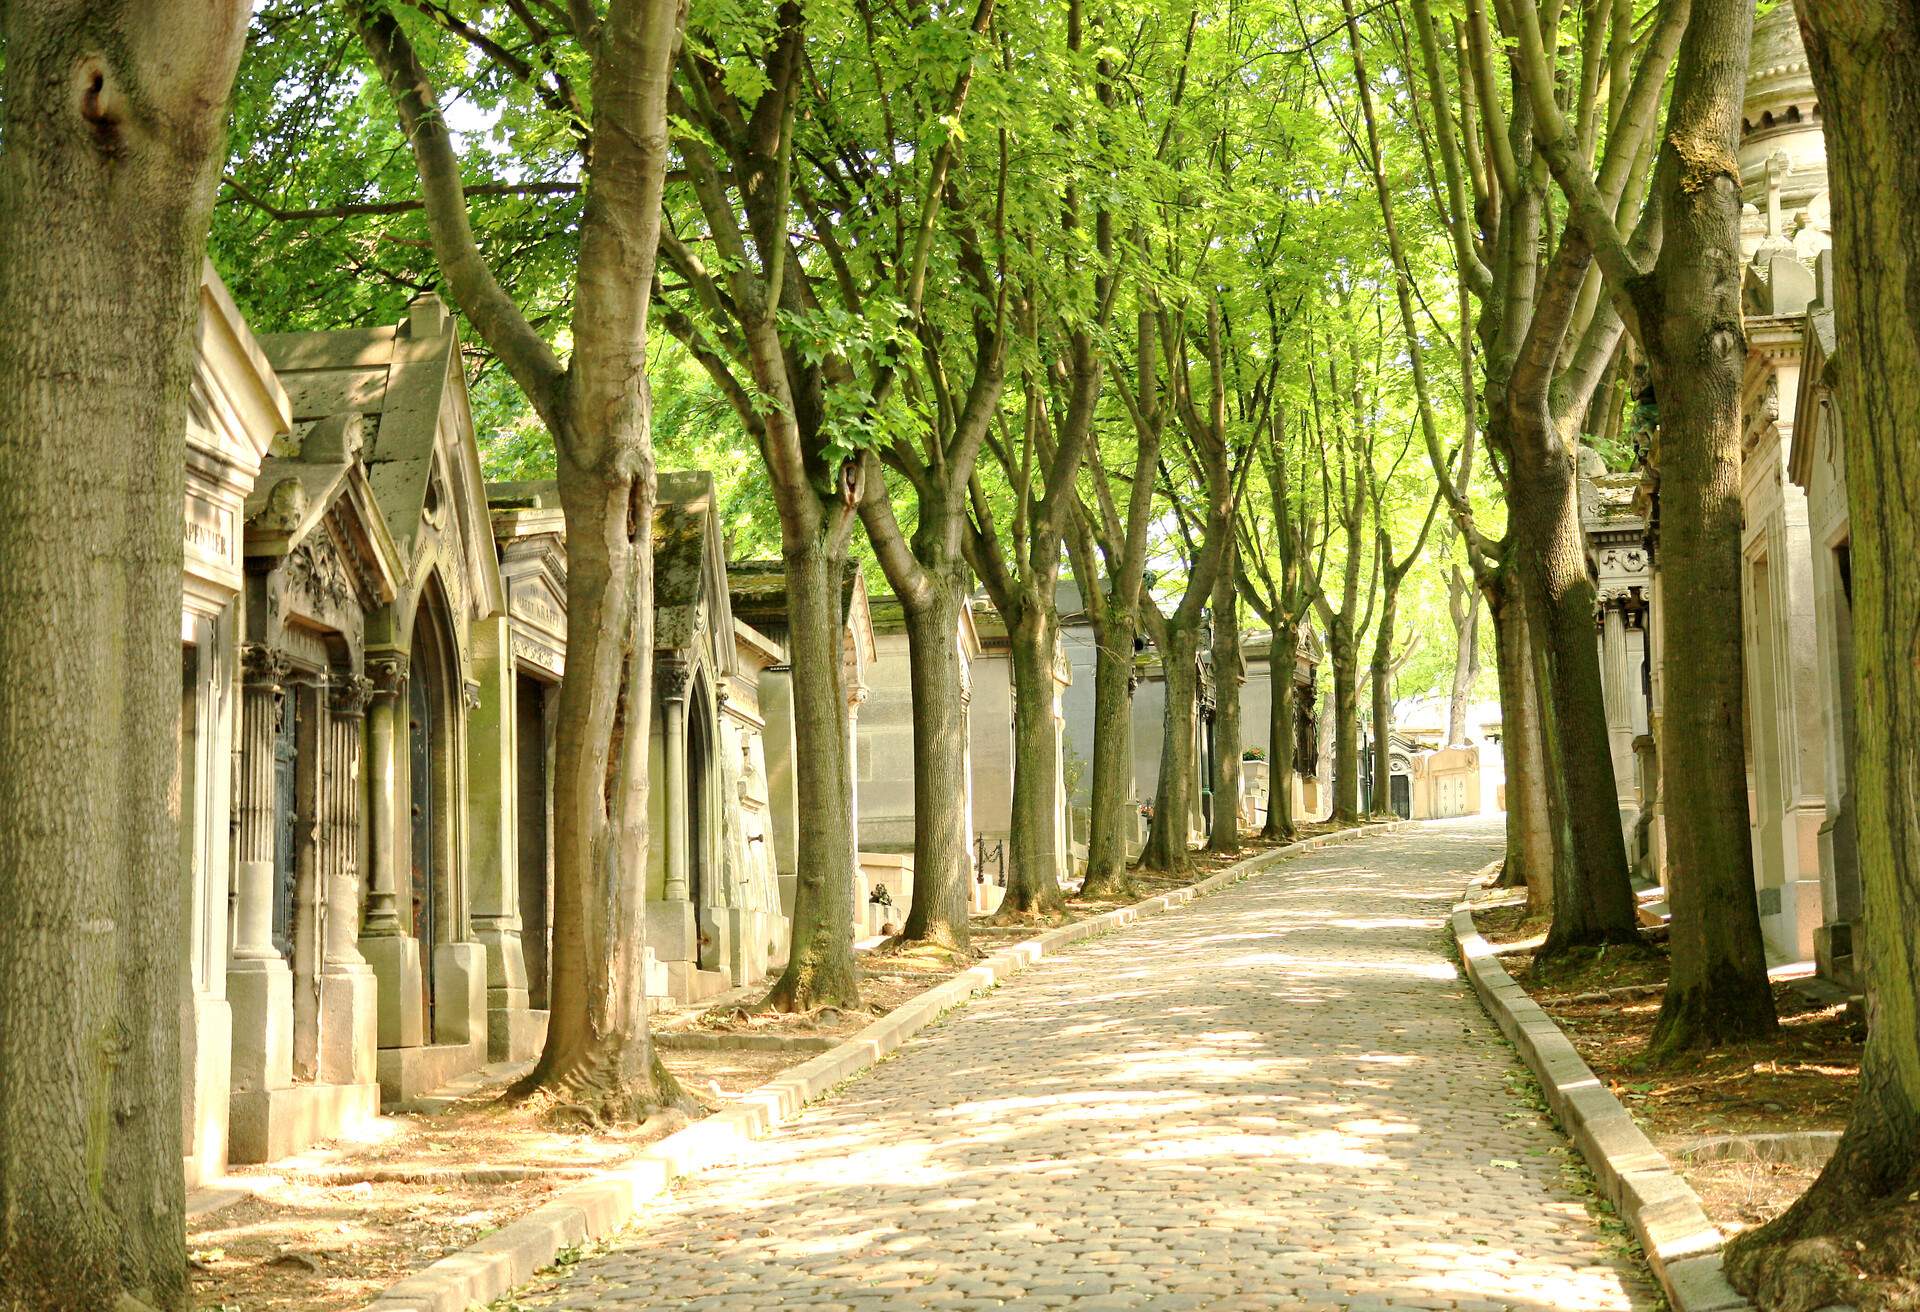 A cemetery path paved with stone and bordered on either side by trees and mausoleums.